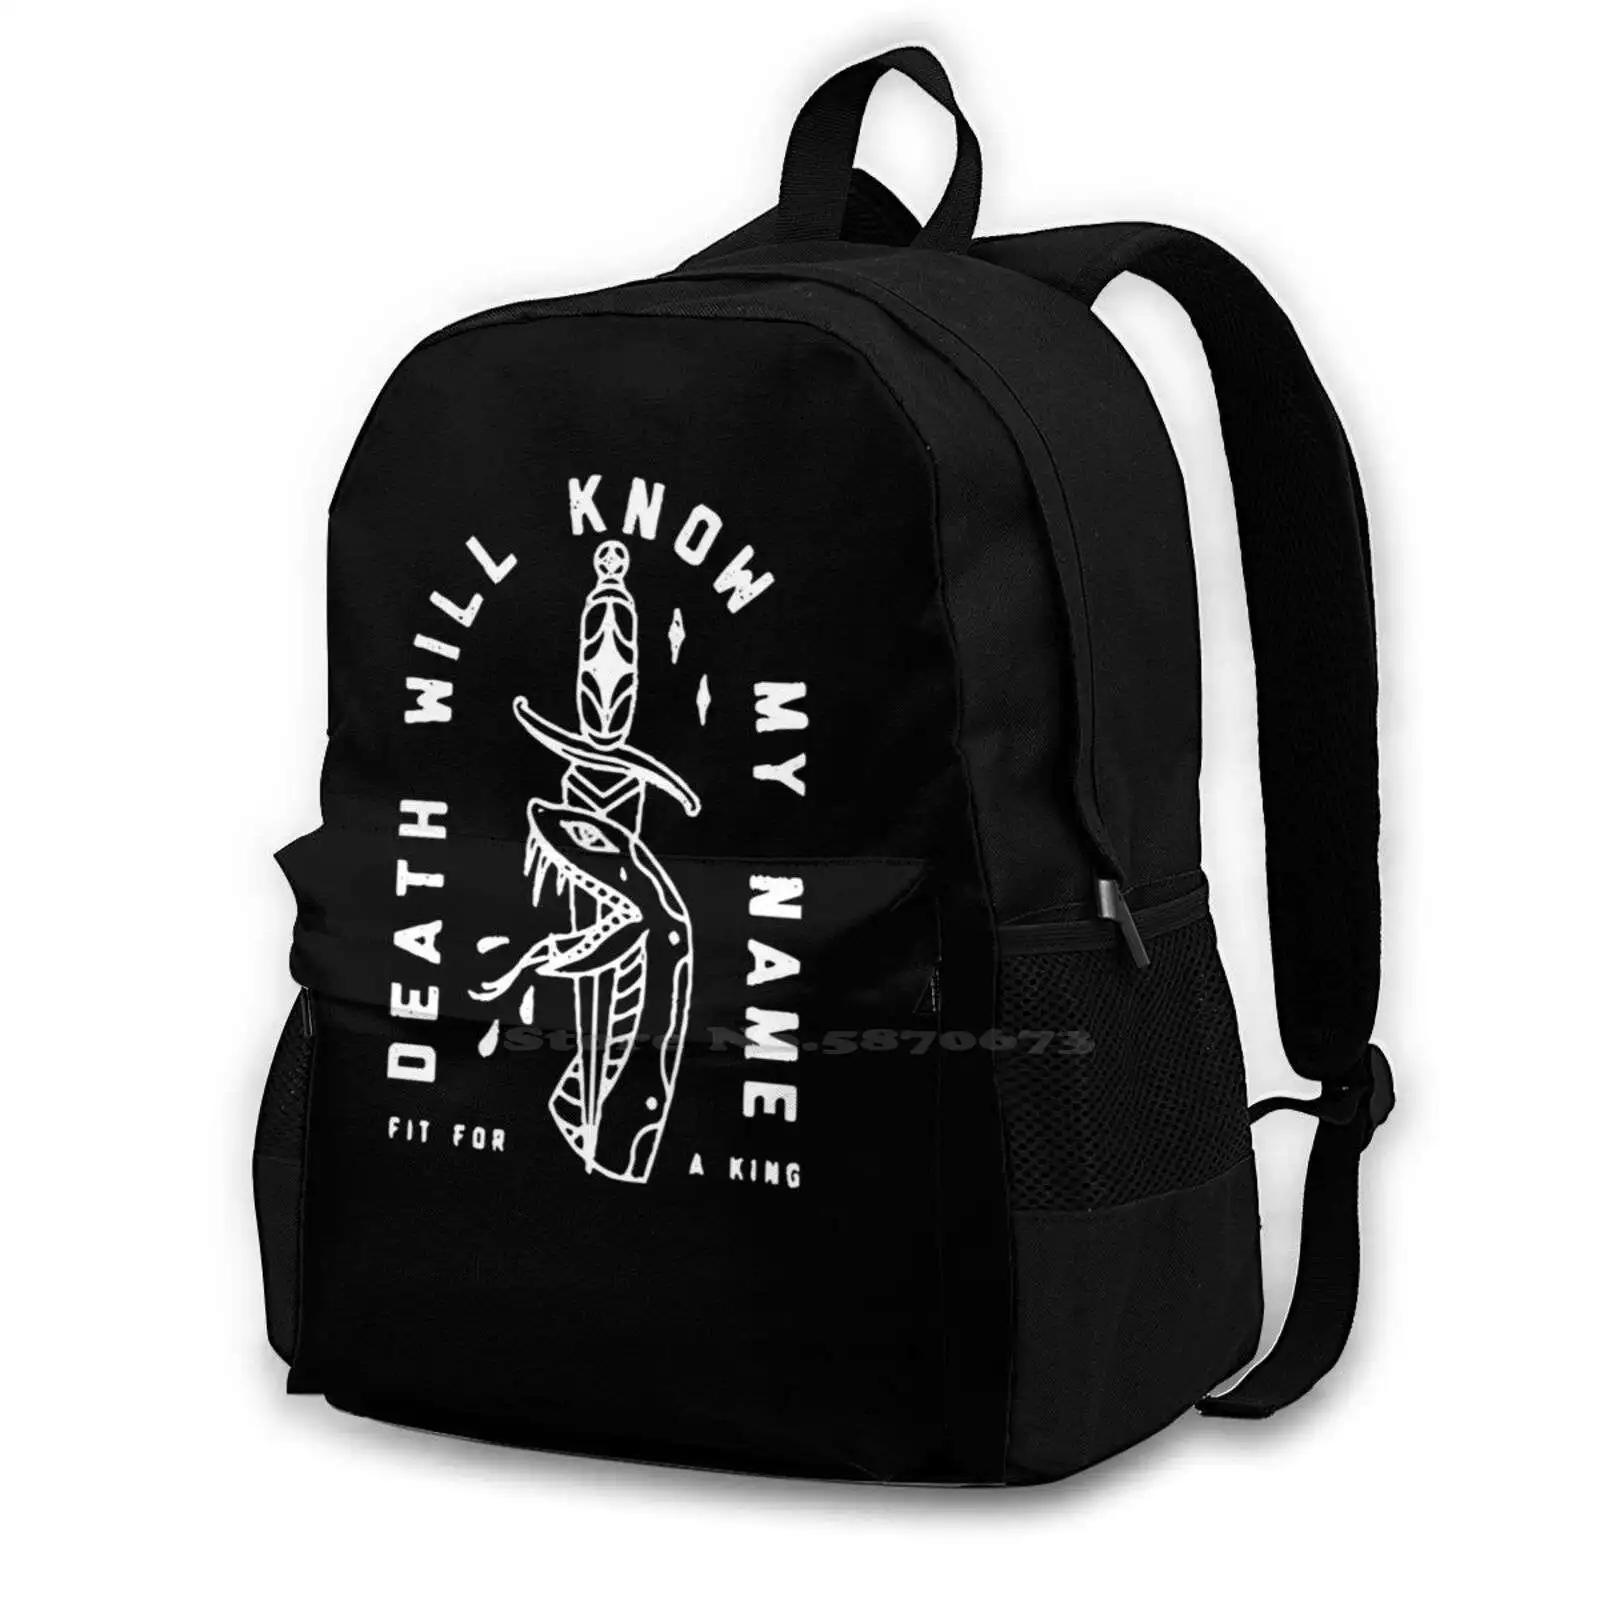 

Fit For A King 12 School Bags For Teenage Girls Laptop Travel Bags Deathcore Core Metalcore Nu Metal Hardcore Metal Death Metal